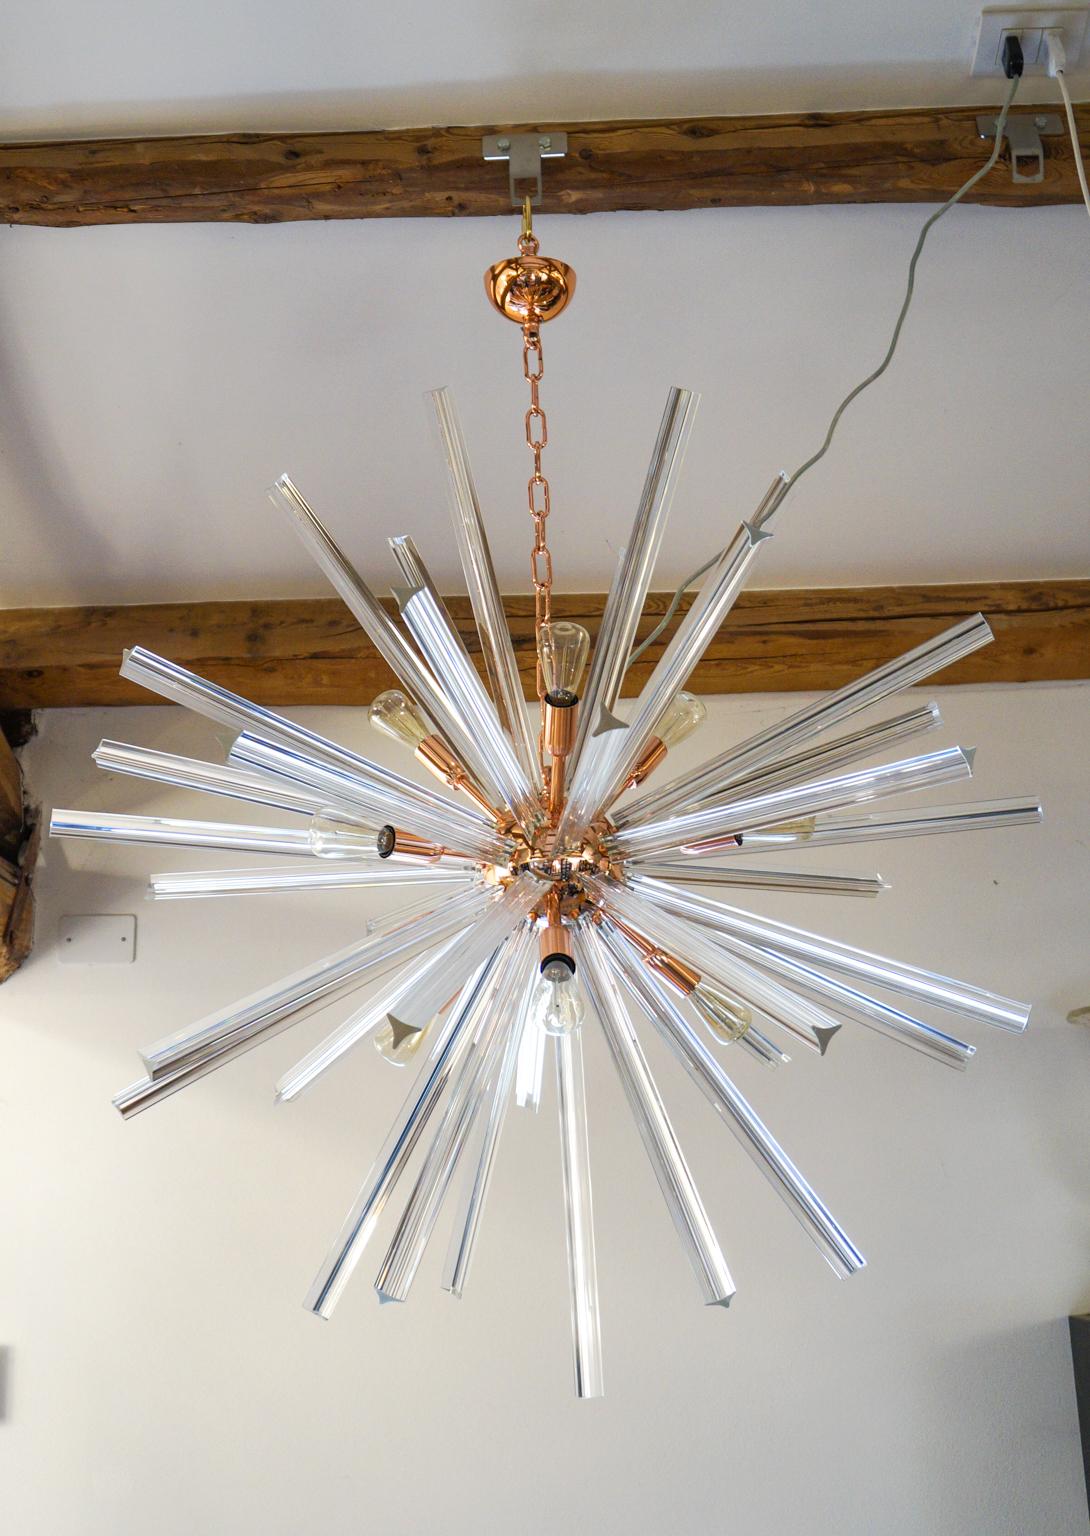 Designed in 1982 by Camer glass, this chandelier has 43 clear glass elements called “Triedri”.
Perfect for a modern space, the chandelier reach the diameter of 90 cm and is lighted by 9 Bubs E14 that create a comfortable atmosphere lighting the